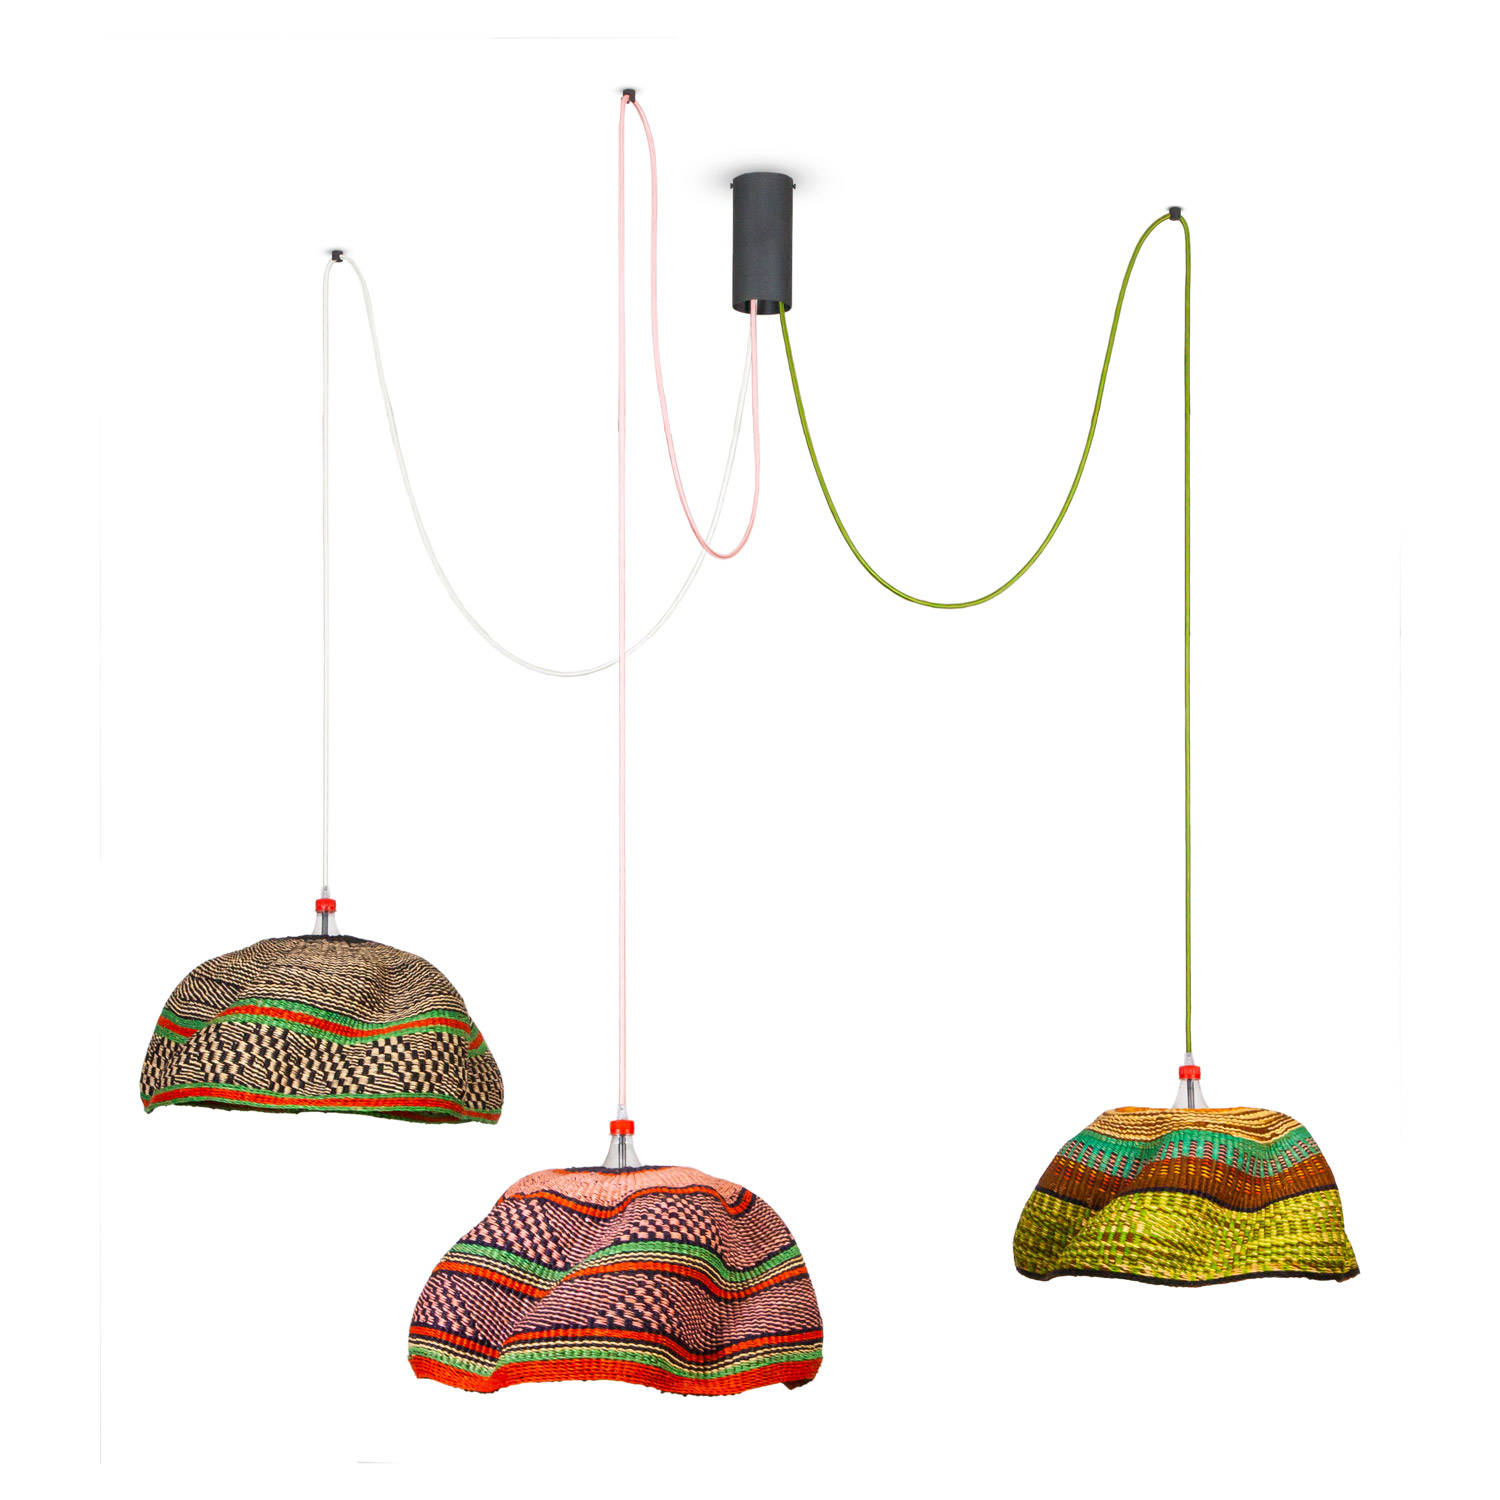 Bolgatanga PET Lamp - A Woven Lamp Collection By Baba Tree Basket And ...